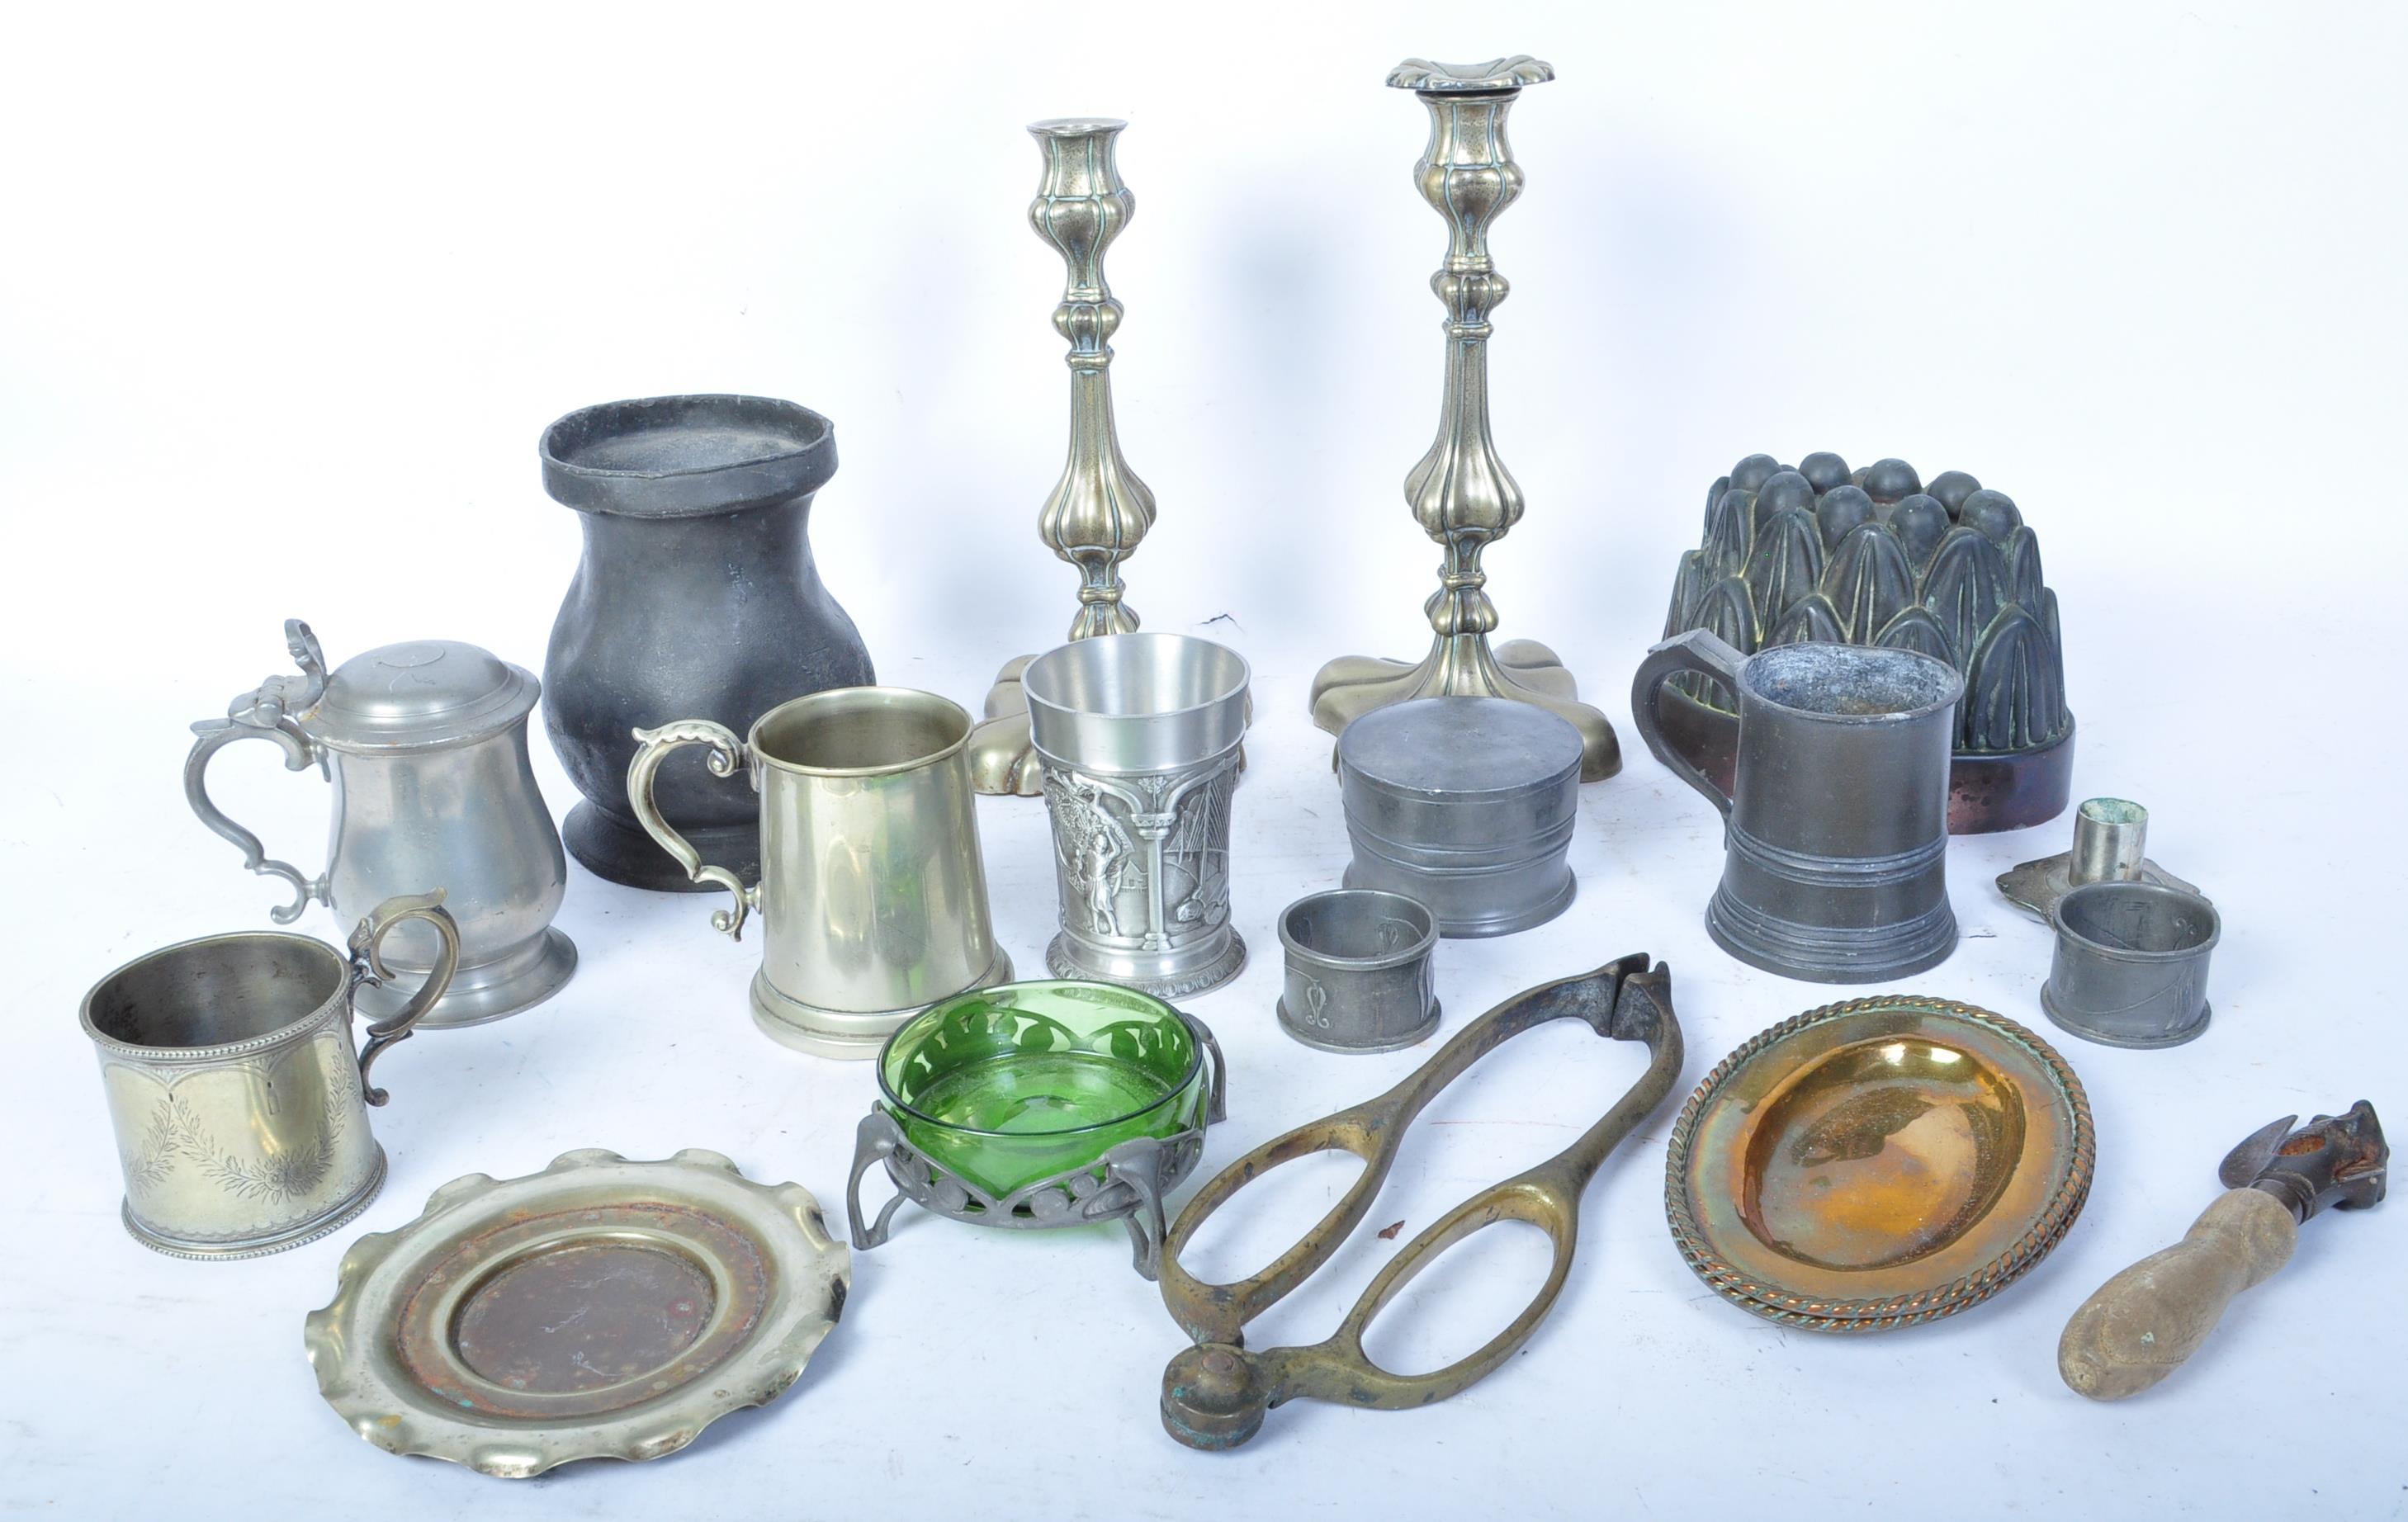 COLLECTION OF 19TH CENTURY COPPER AND BRASSWARE